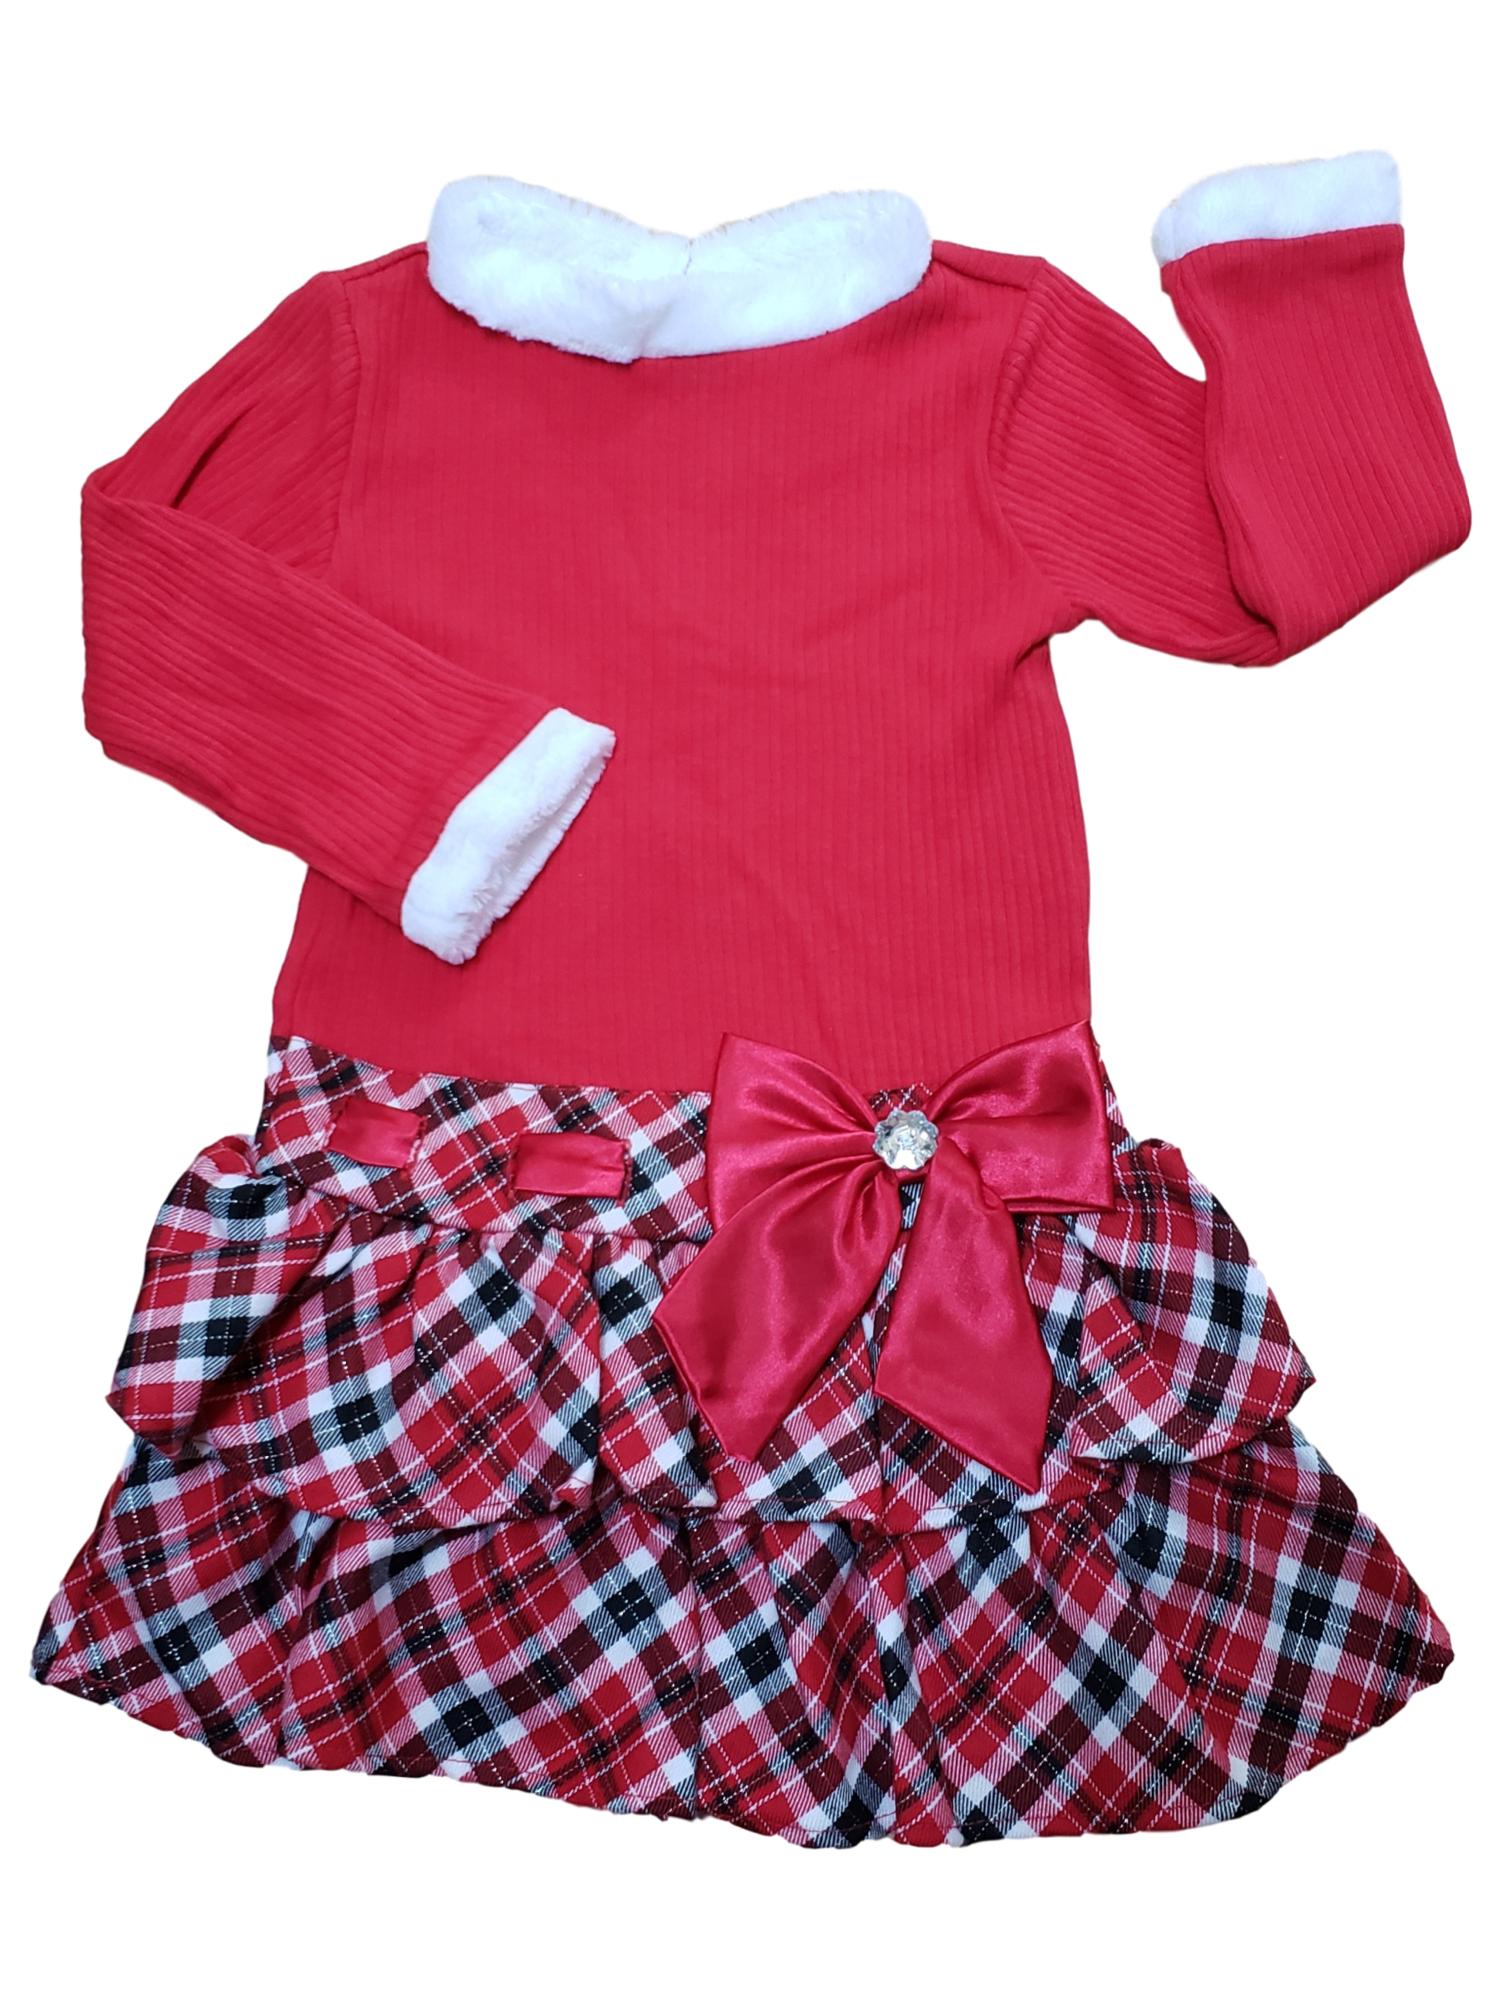 Youngland Girls Red Plaid Metallic Thread Long Sleeve Bling Bow Christmas Party Dress